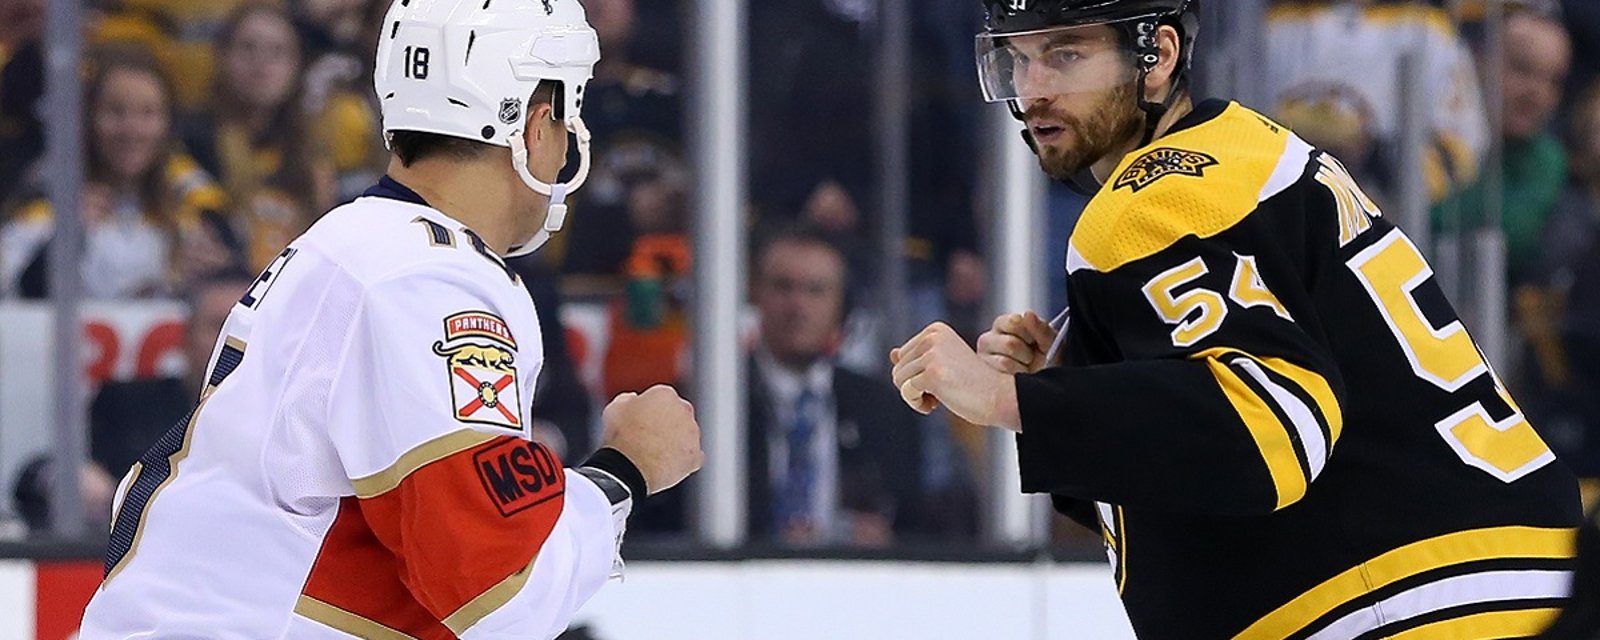 Agent gives a worrying update on NHL veteran Adam McQuaid.